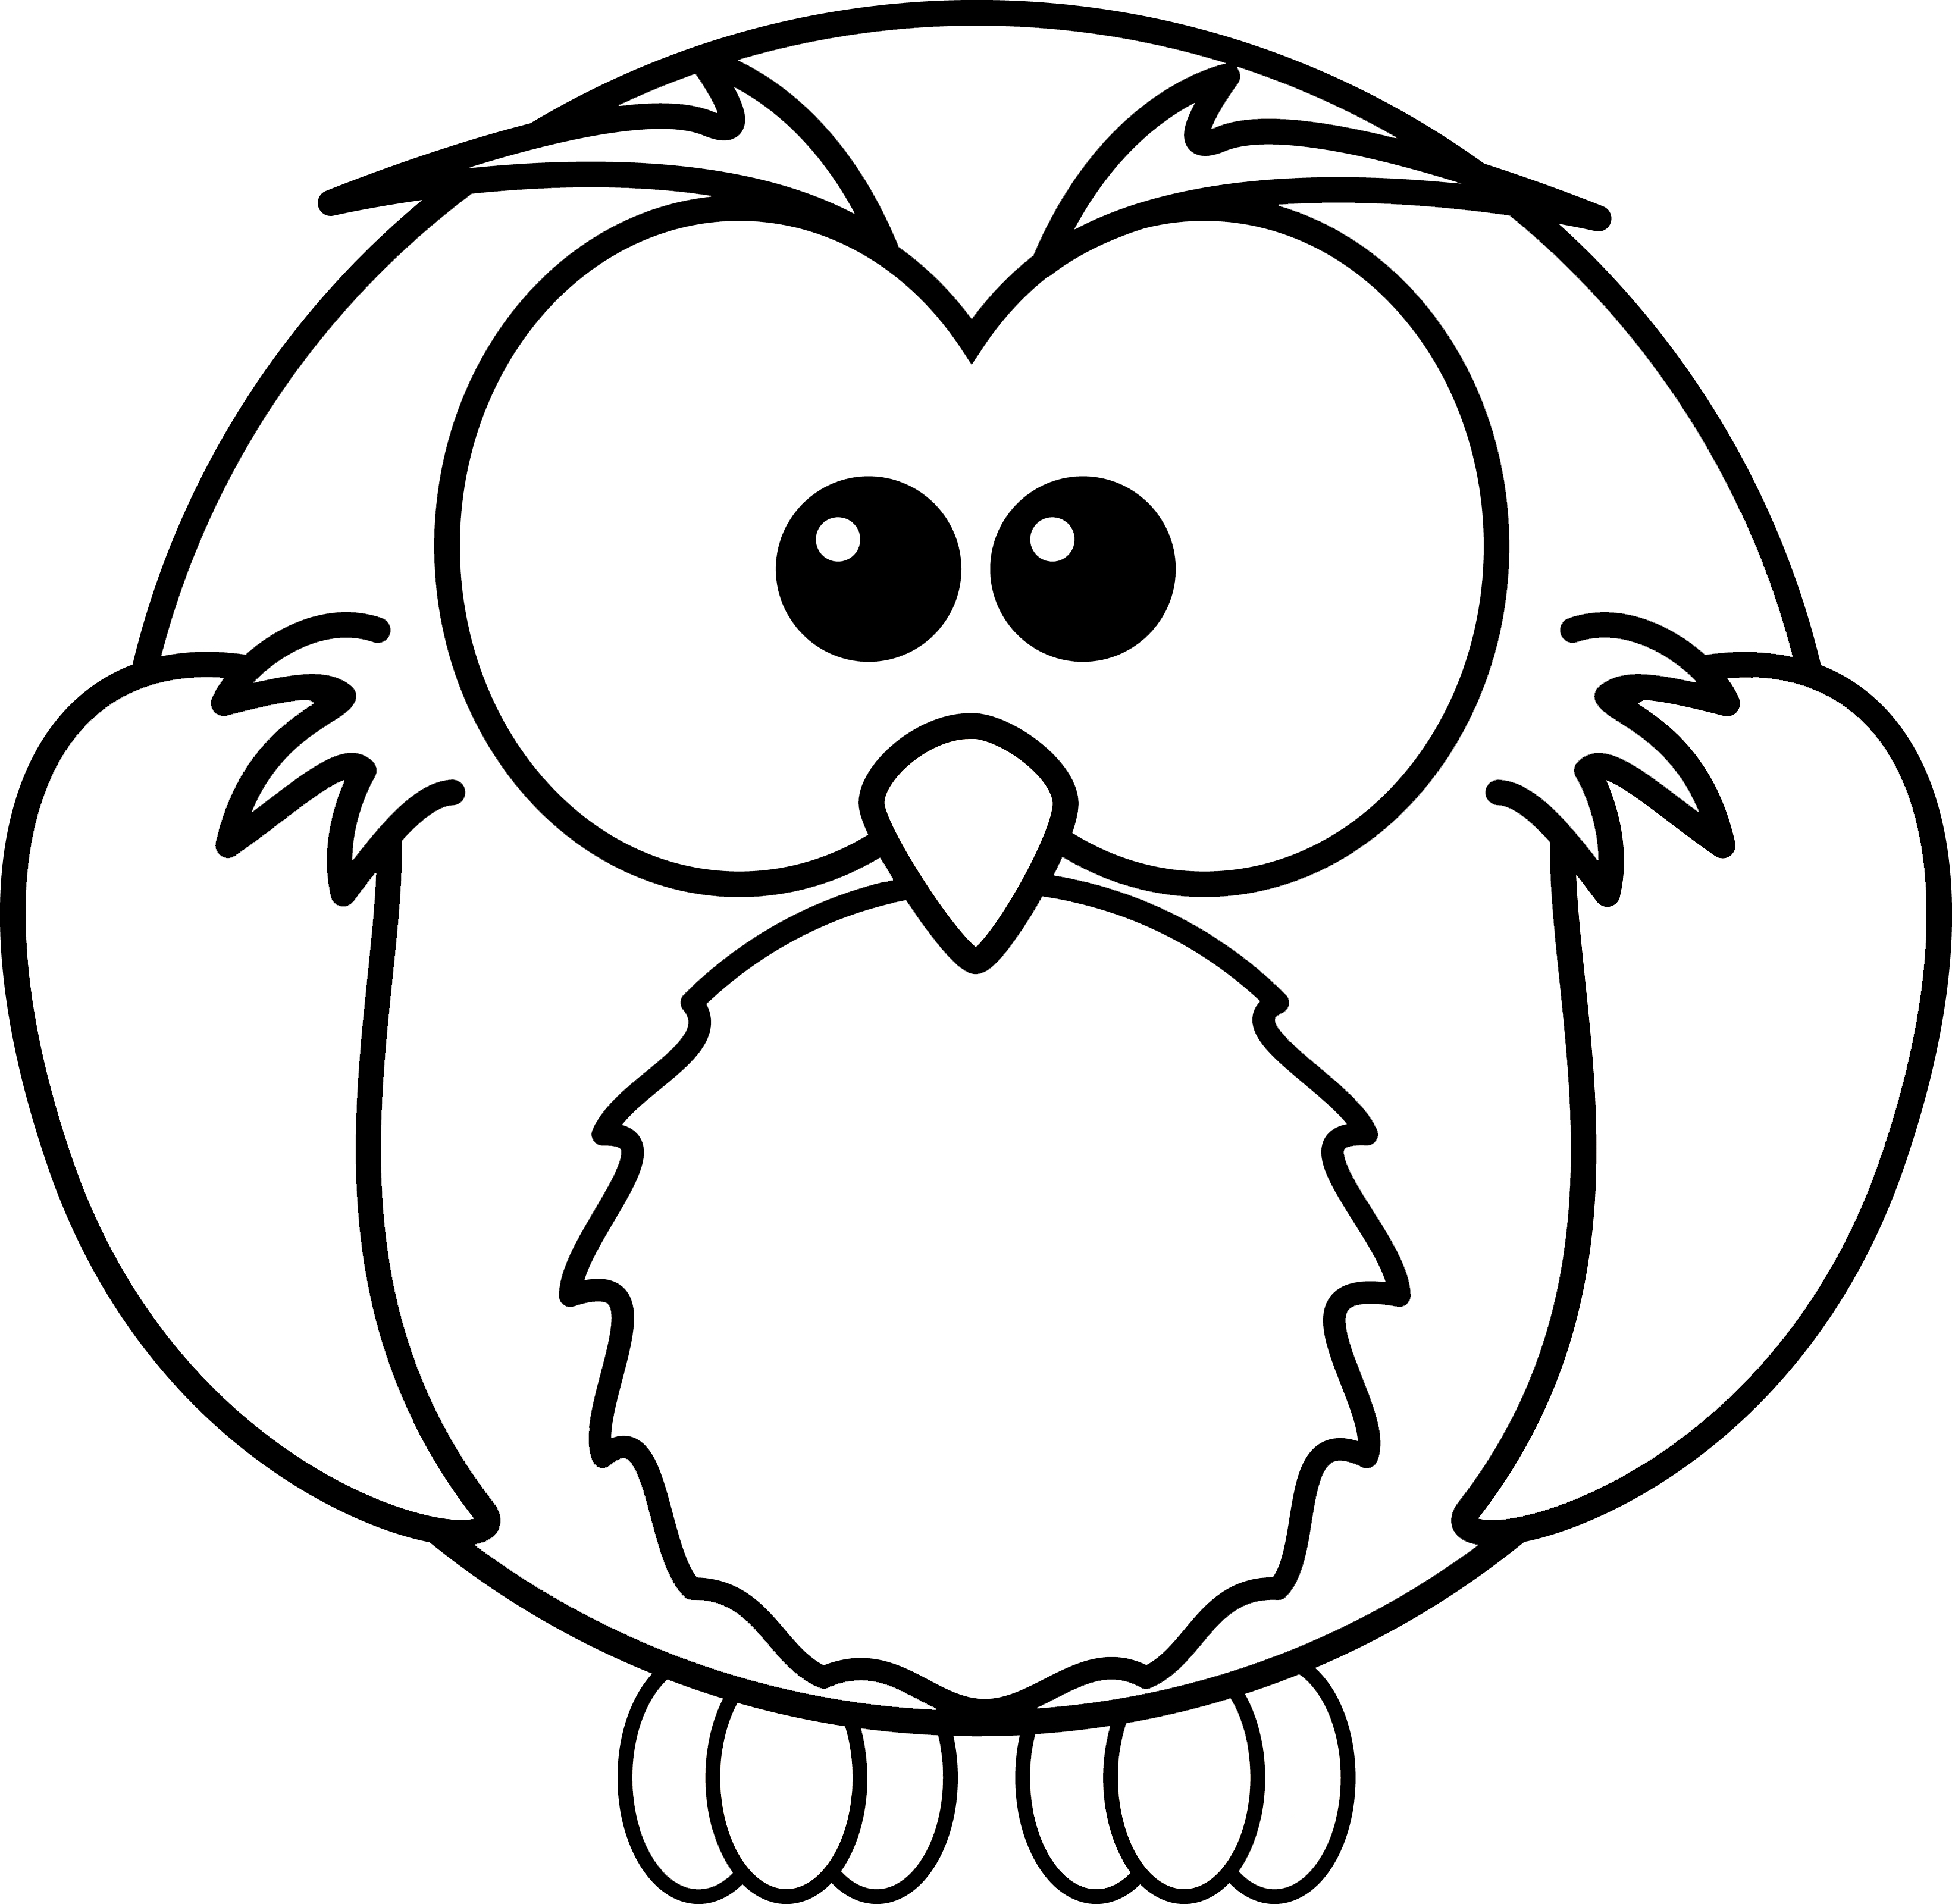 Cartoon Pic Of Owl - ClipArt Best